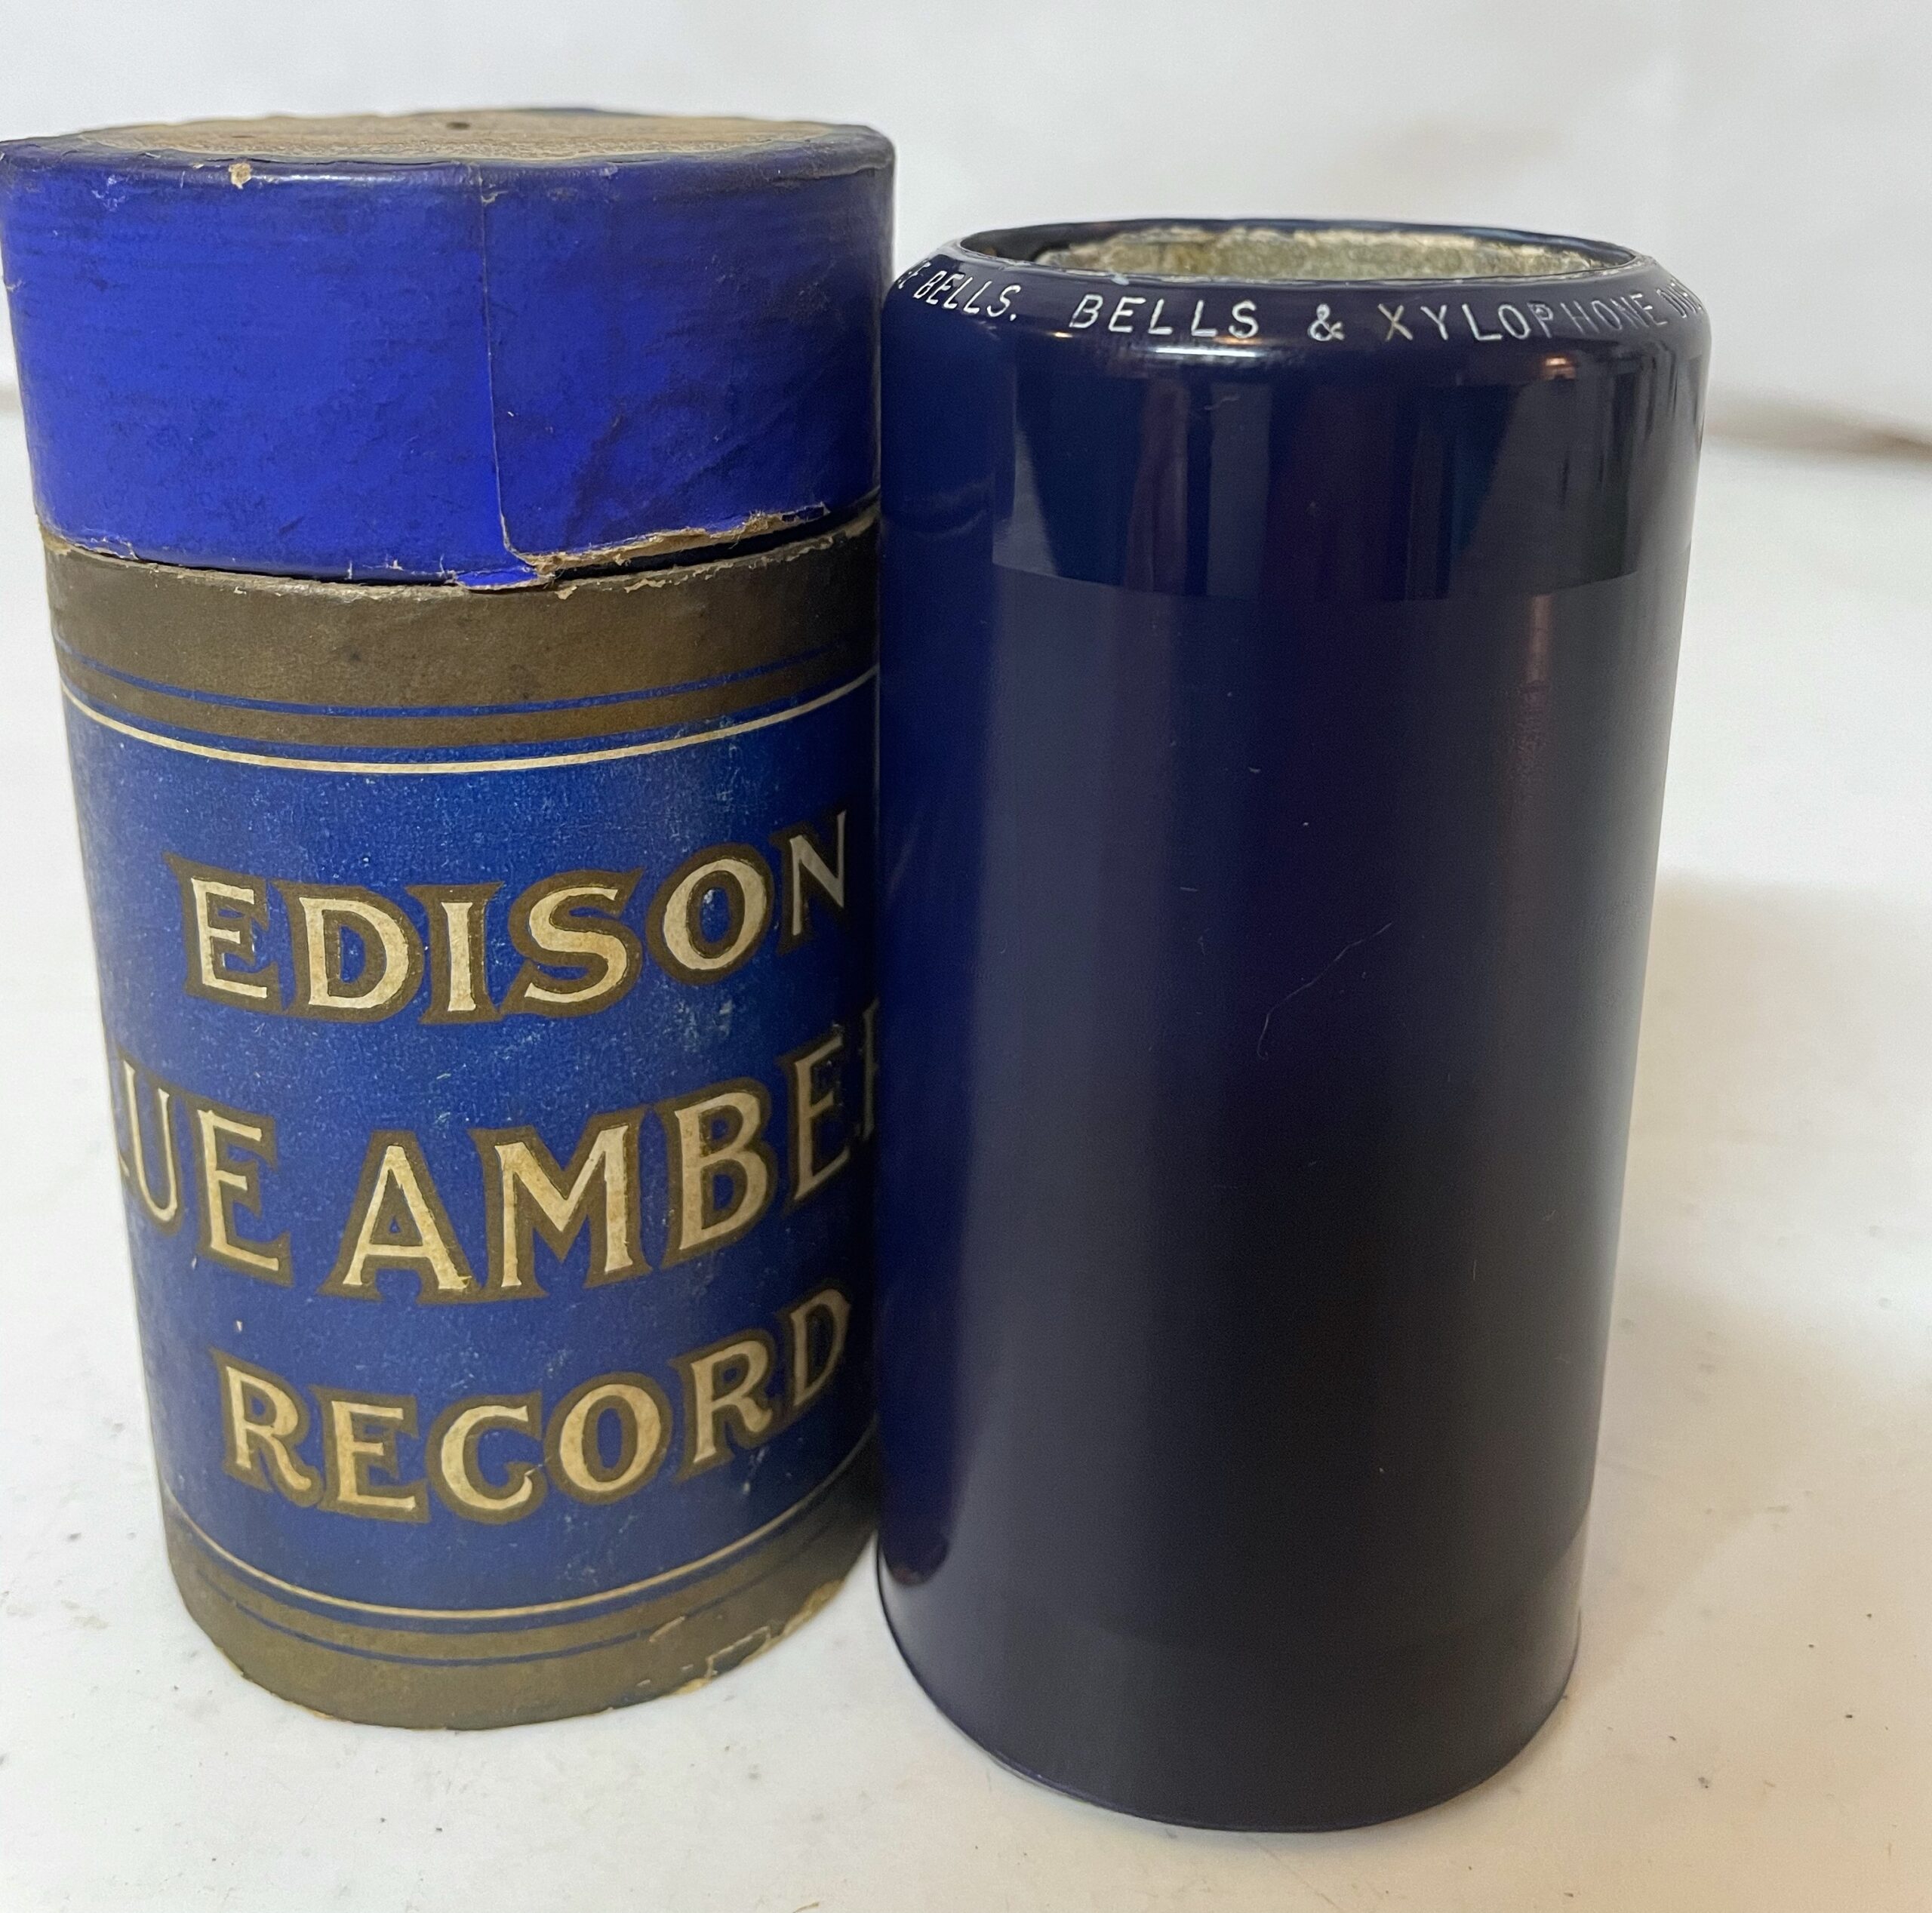 Edison 4 min. Cylinder… “How ‘ya Gonna Keep ’em Down on the Farm after They’ve Seen Paree?”